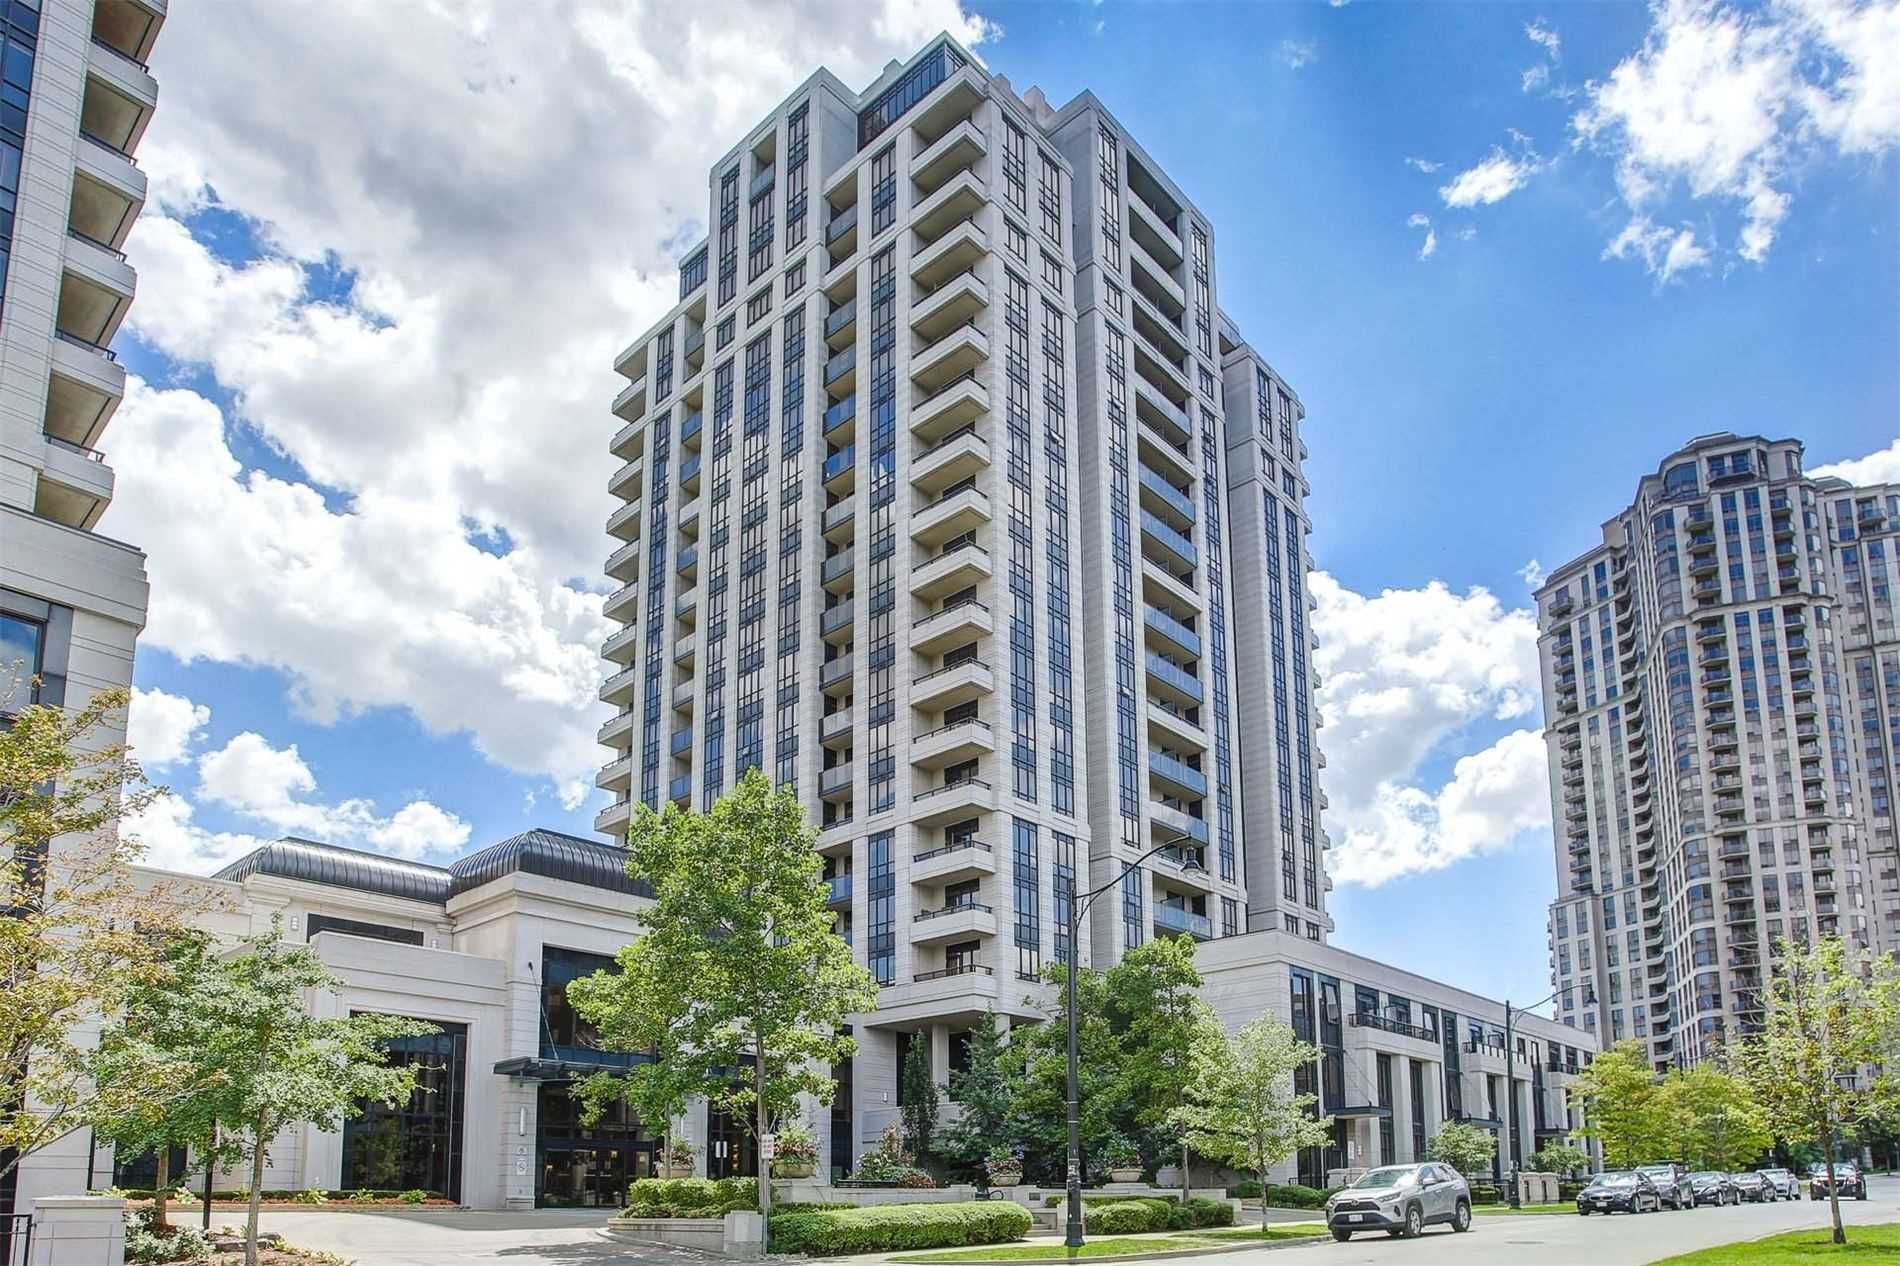 100 Harrison Garden Blvd. This condo at Avonshire Condos is located in  North York, Toronto - image #1 of 3 by Strata.ca